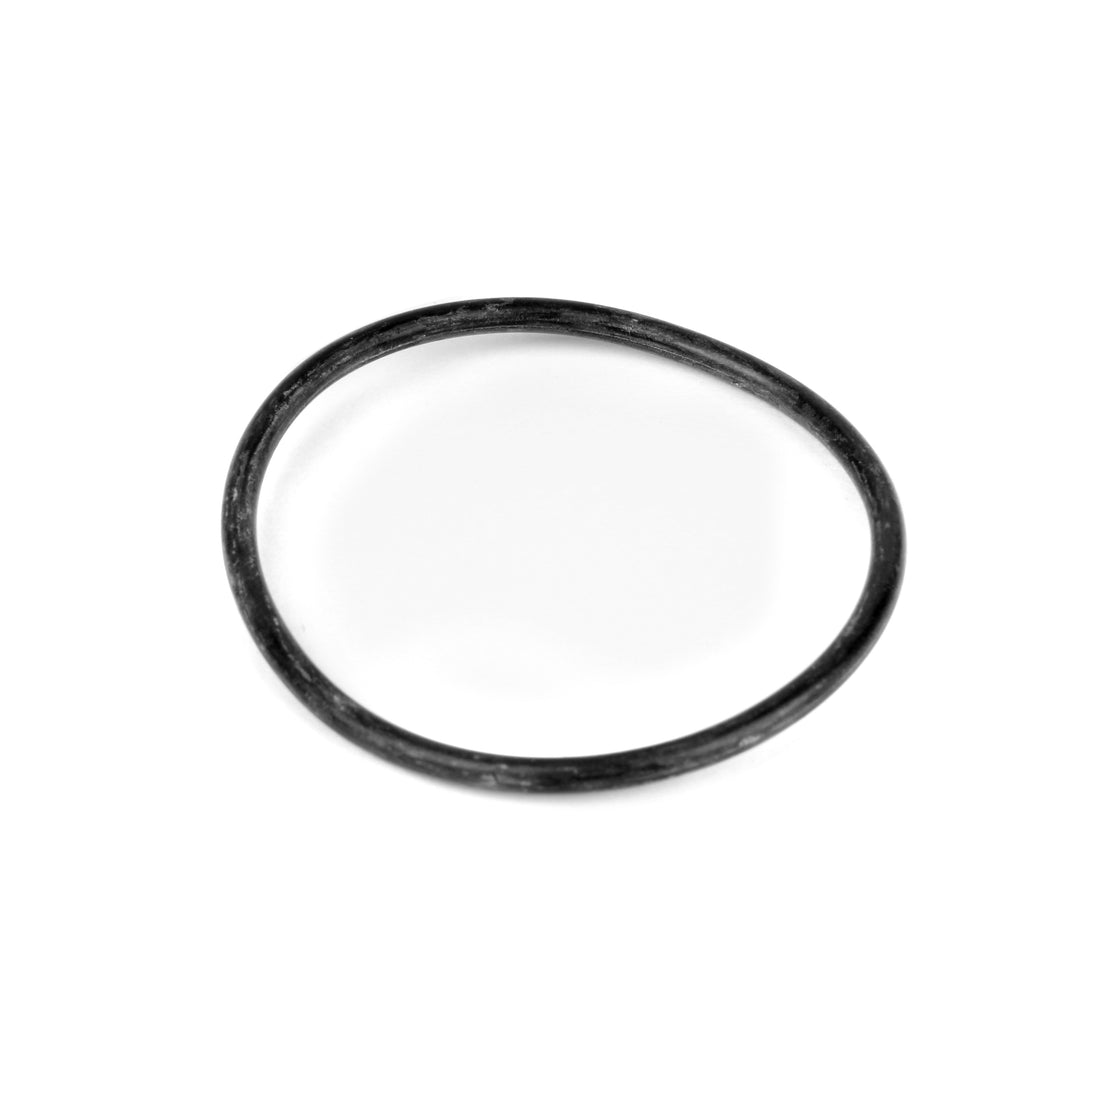 Rubber O-Ring 3181 EPDM